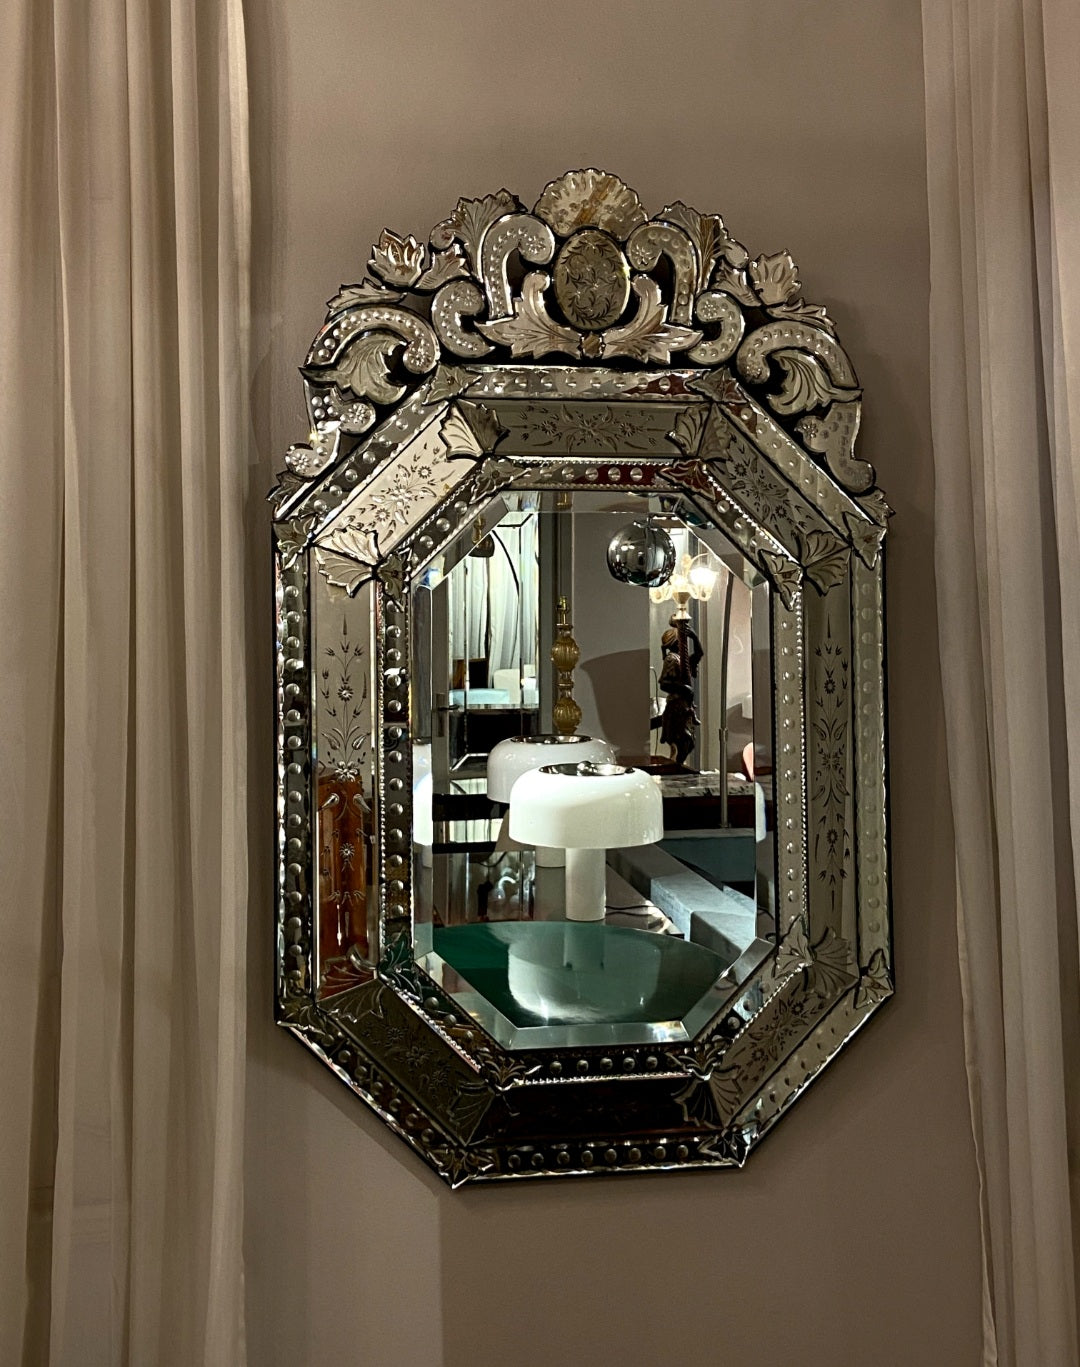 Pair of Venetian Mirrors - Third Space- The Mob Collective